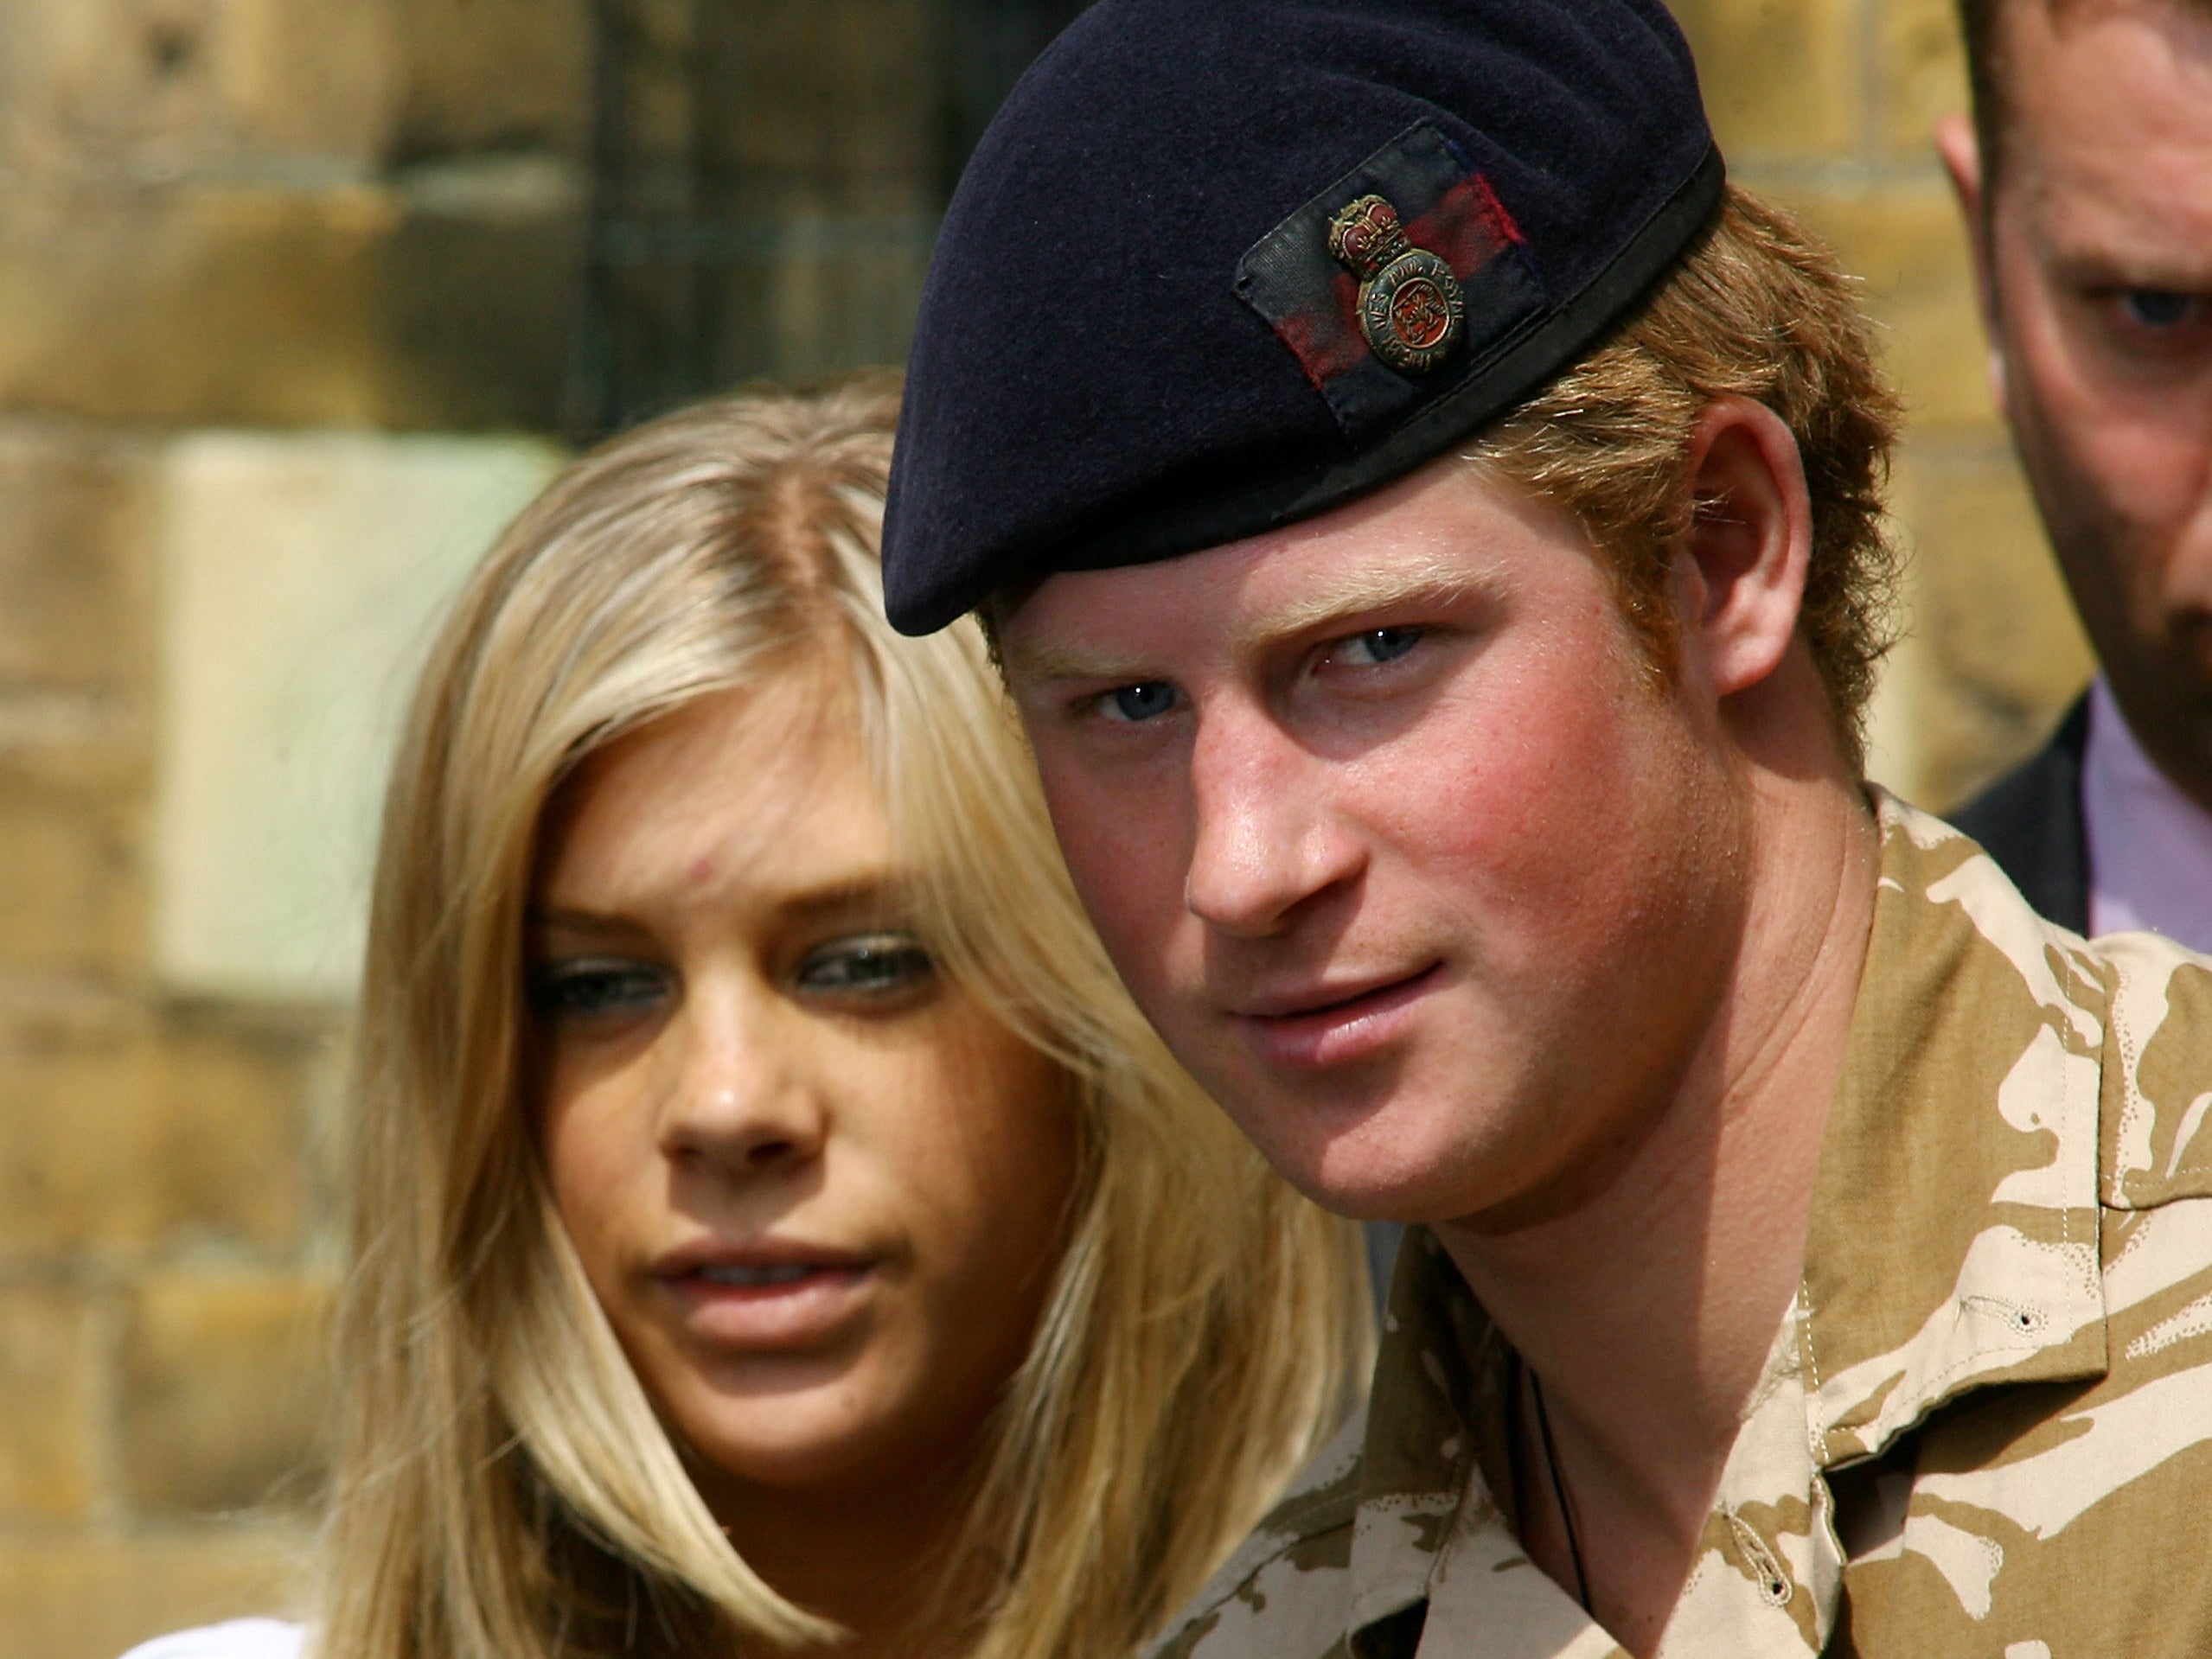 Prince Harry and Chelsy Davy broke up in 2009